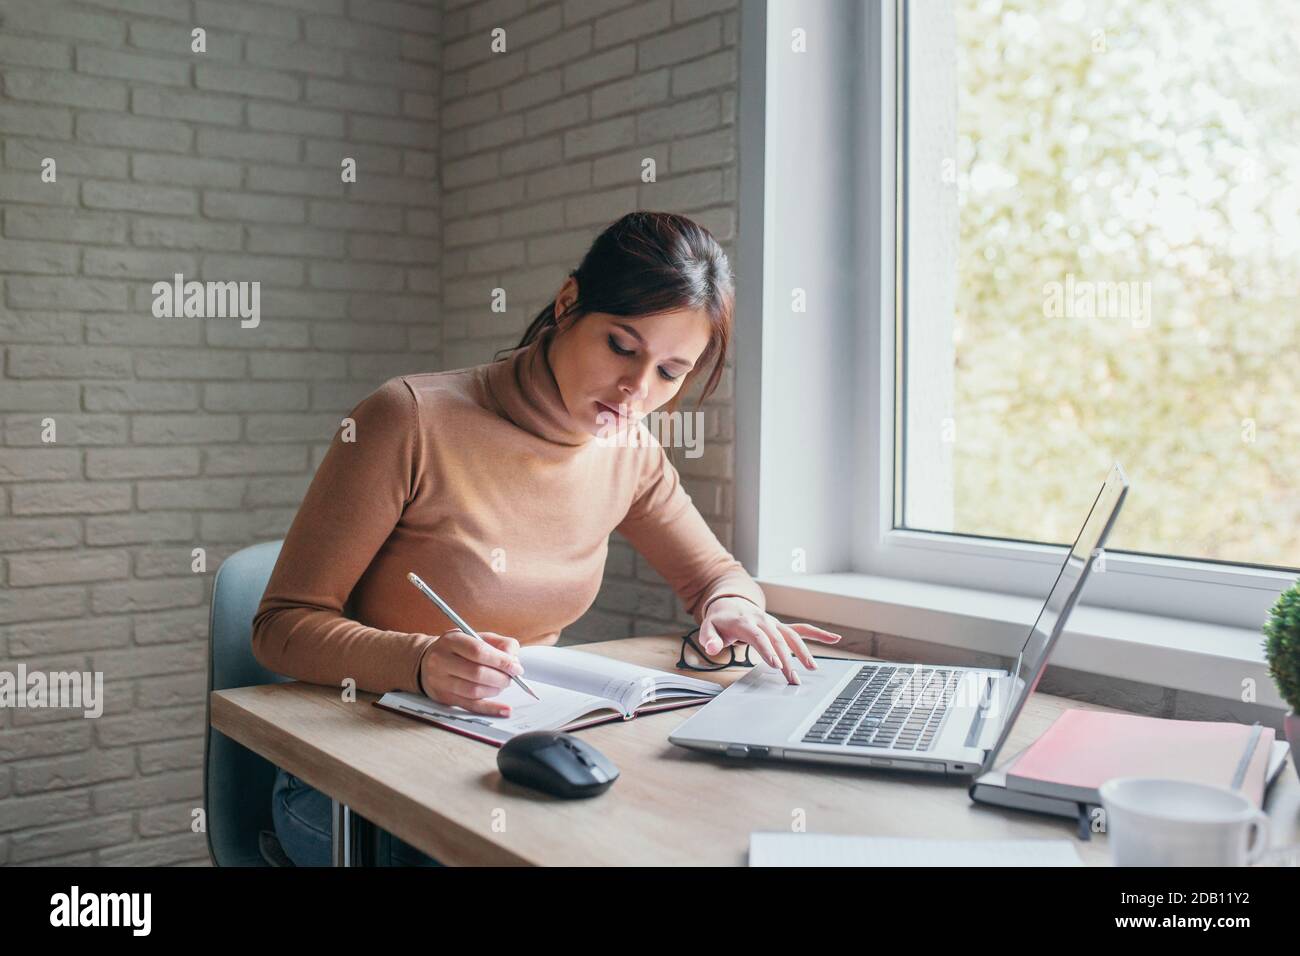 Happy hispanic young woman wearing glasses using laptop computer working studying at home office Stock Photo